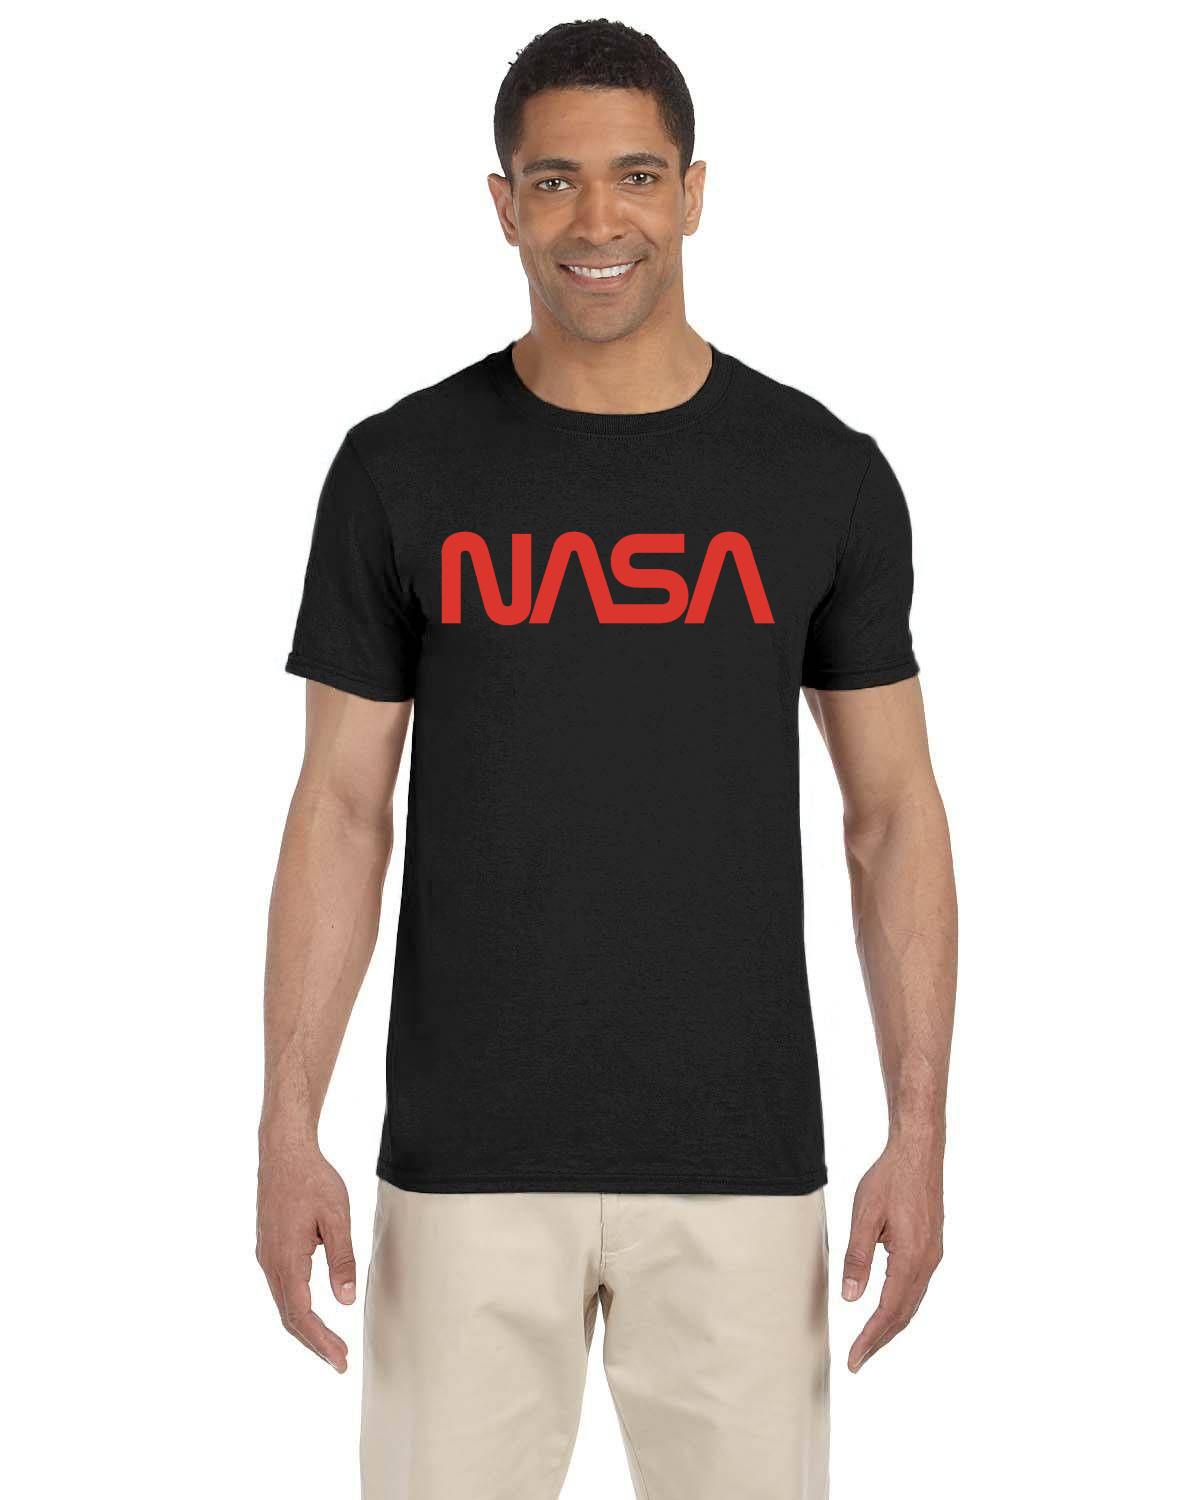 NASA Worm Logo Men's T-Shirt: Official Space Agency Graphic Tee